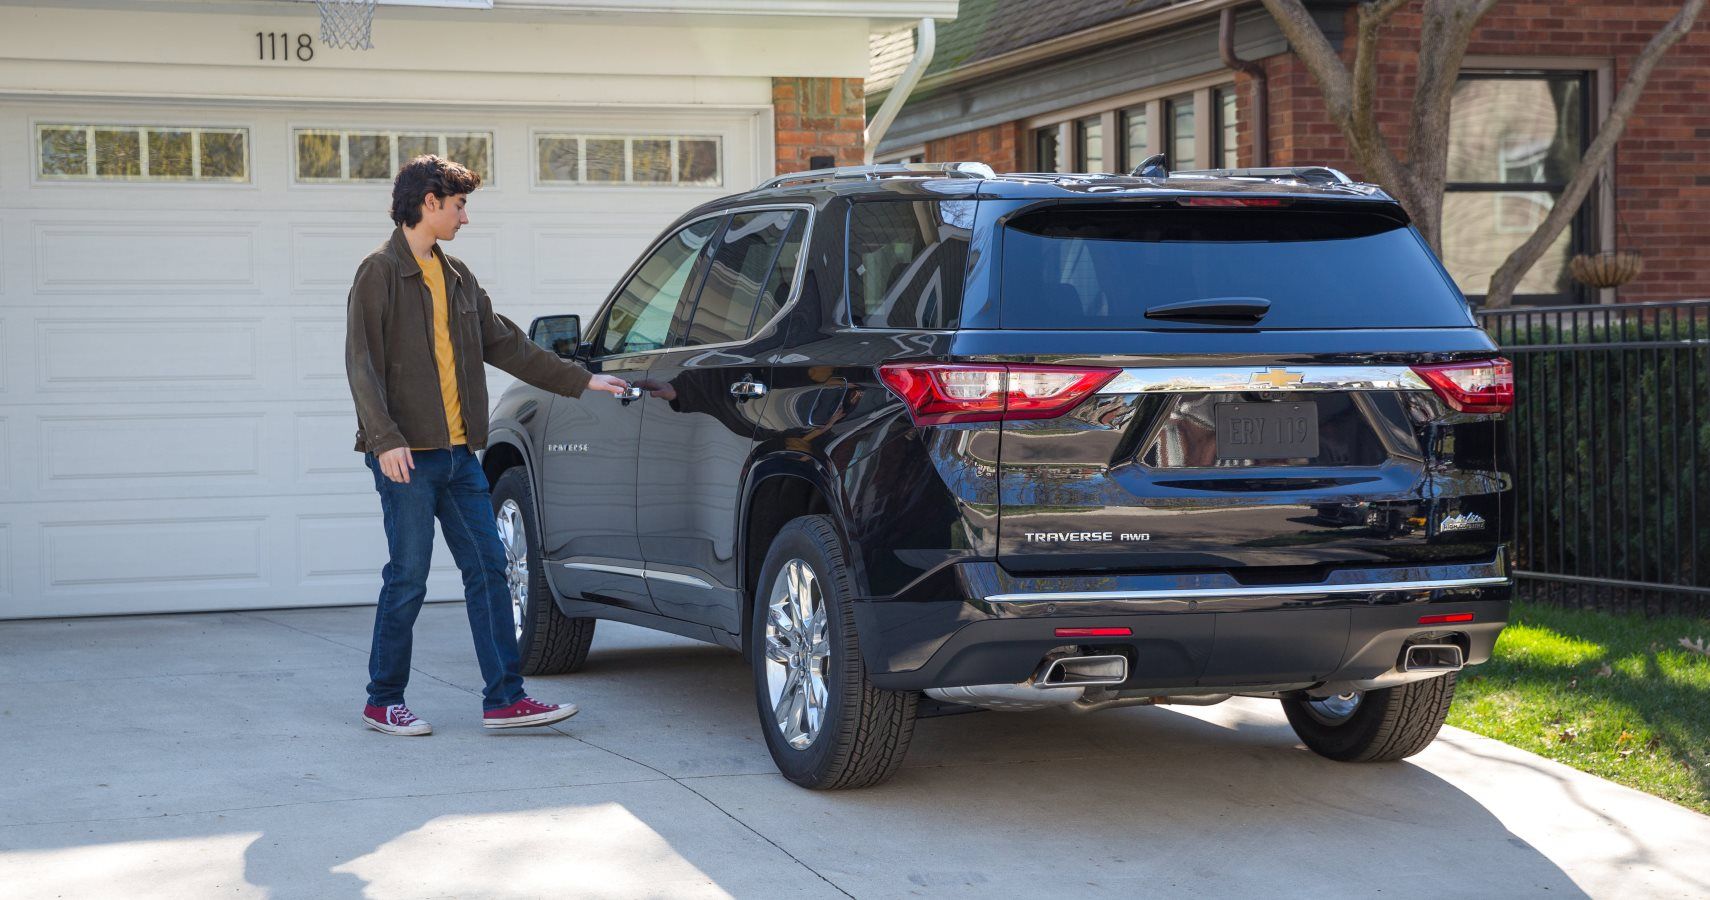 Chevrolet’s Teen Driver system with the new industry-first Buckle to Drive feature will be standard on the 2020 Chevrolet Traverse, Malibu and Colorado, all arriving summer 2019. (Photo by John F. Martin for Chevrolet)